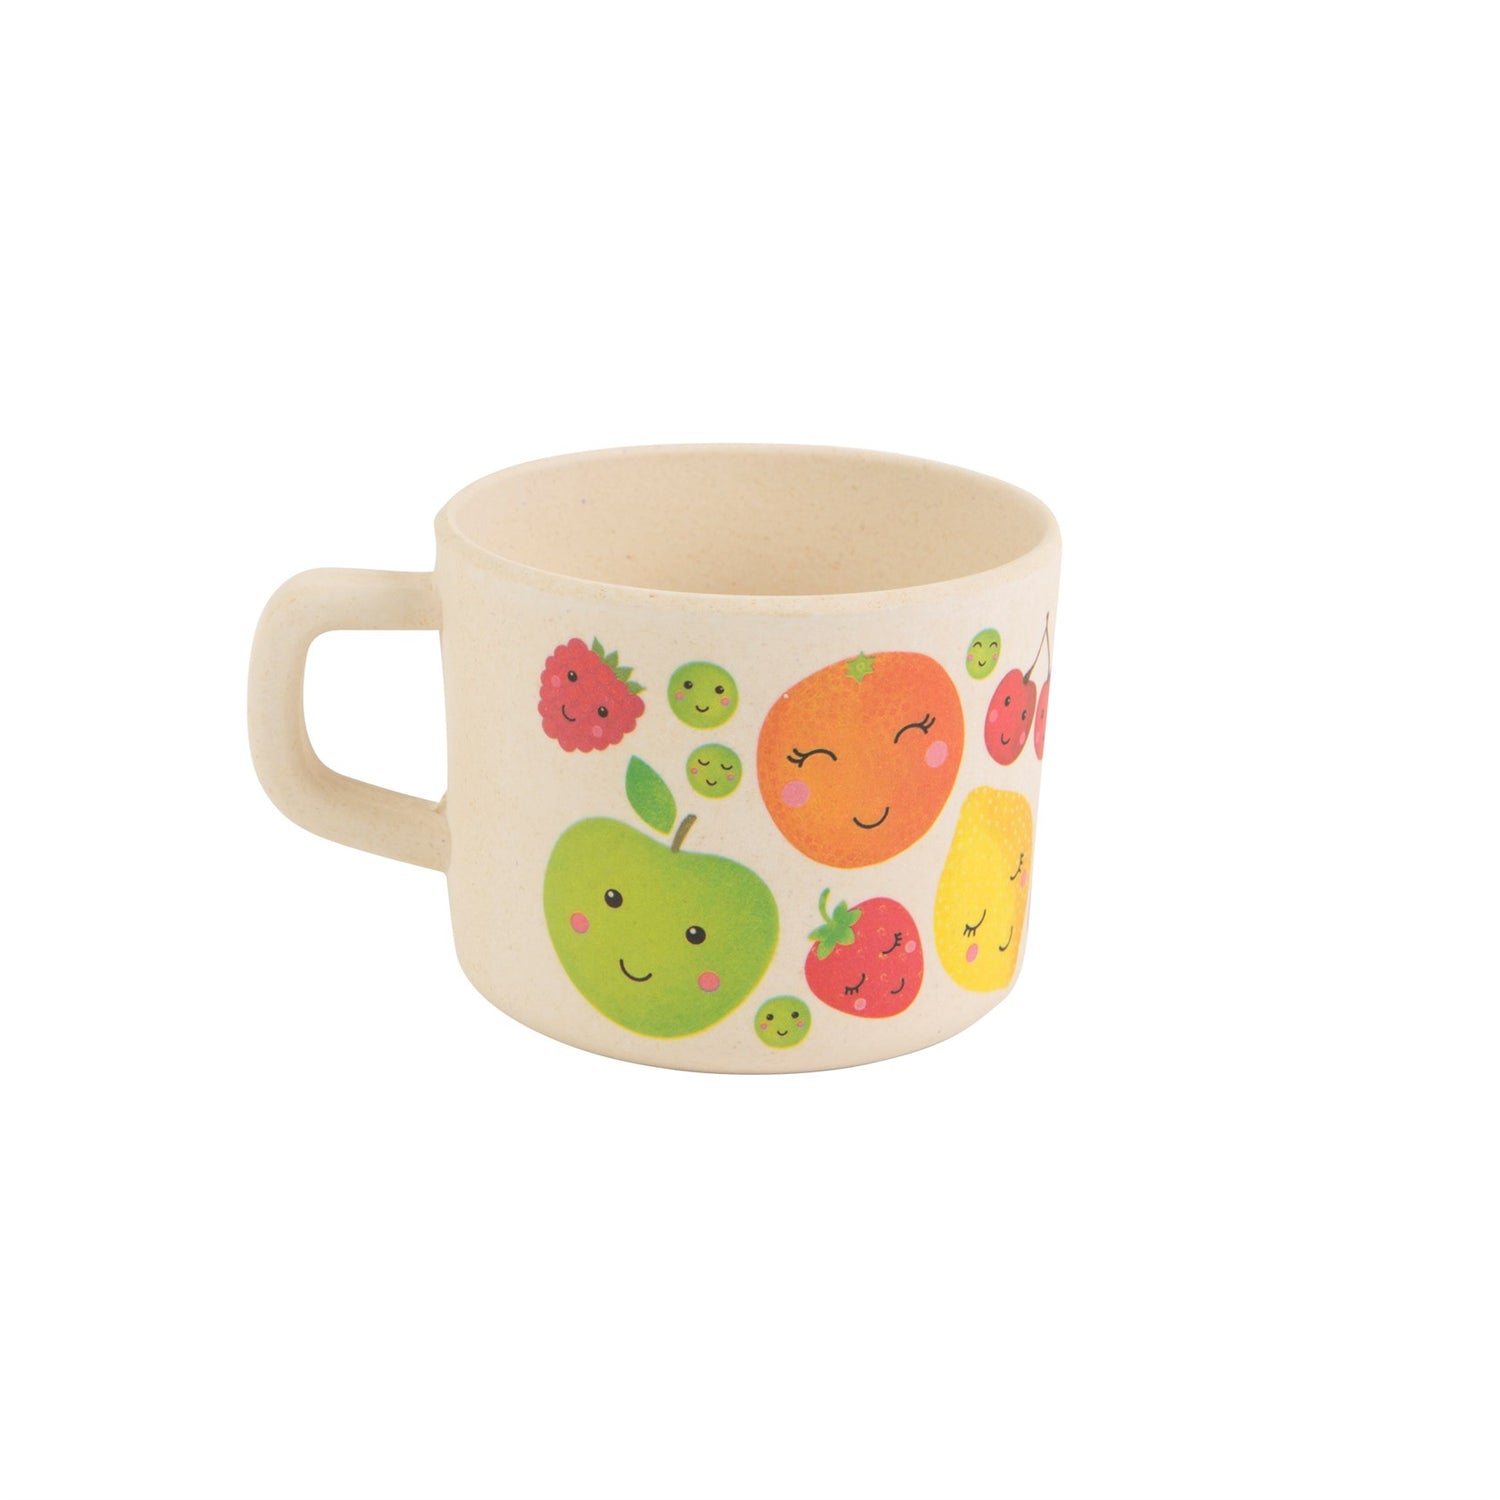 Stay healthy with this gorgeous bamboo mug featuring fun vegetable and fruit characters.